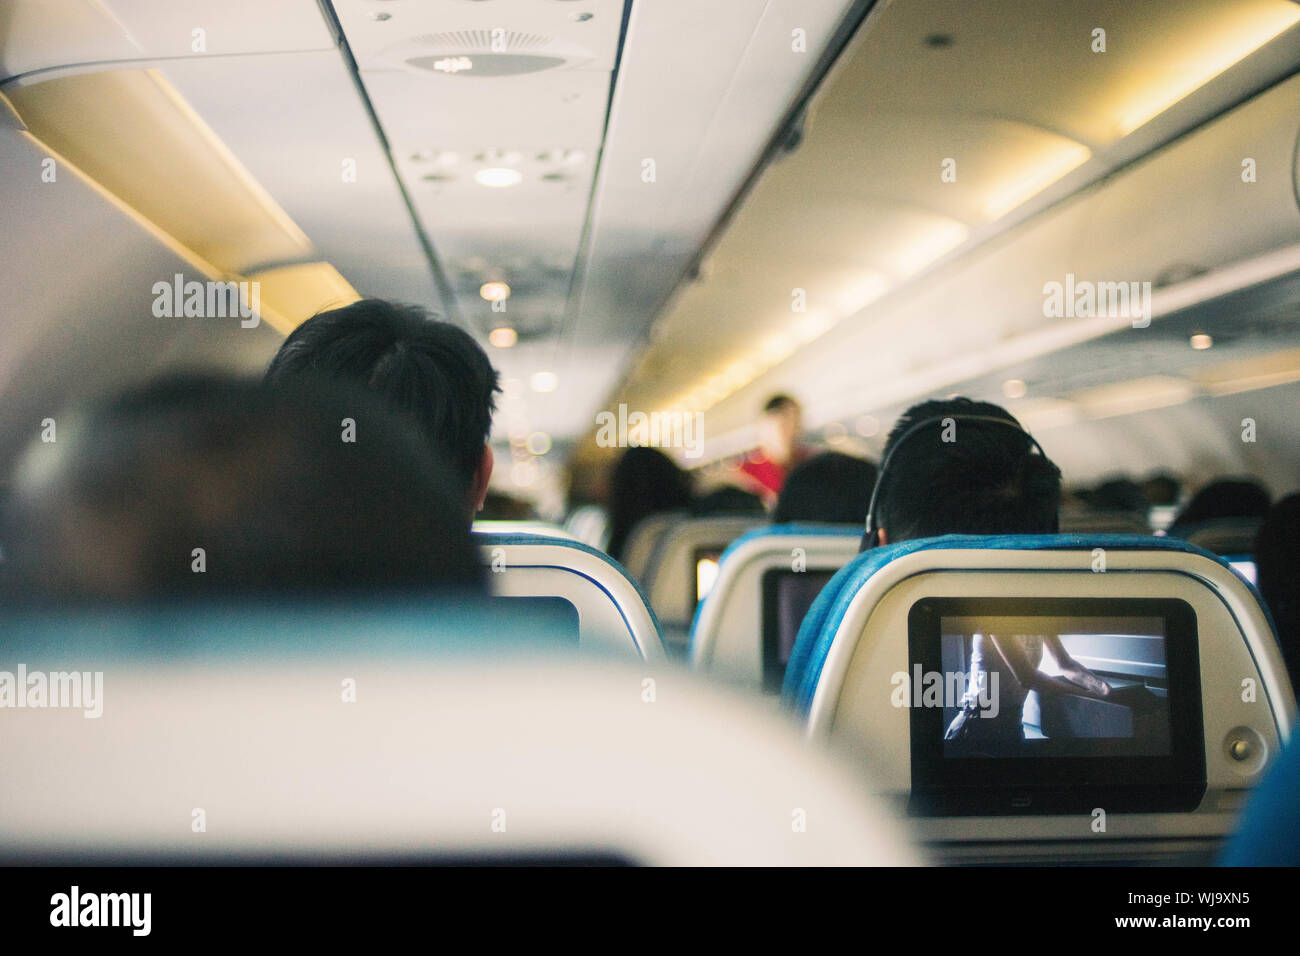 interior of a plane with tv screen for in flight entertainment. Stock Photo